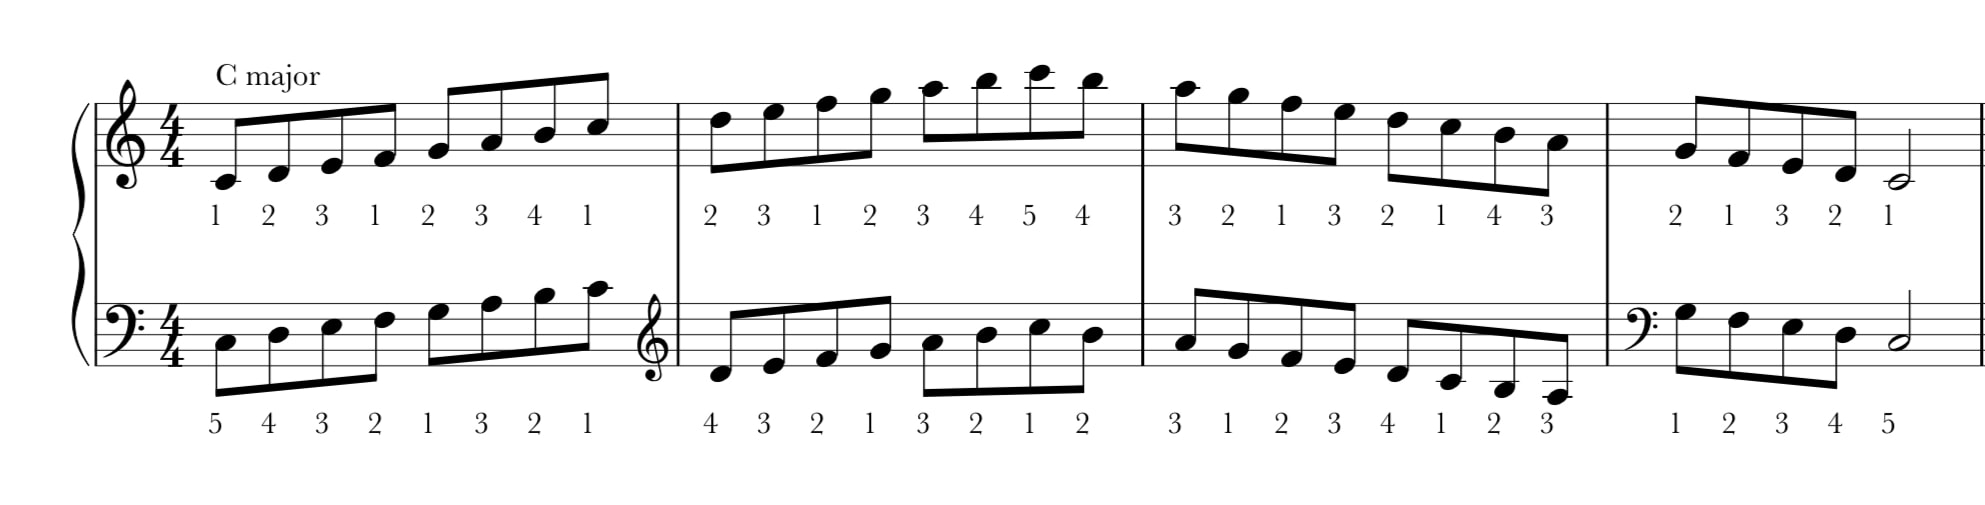 C major scale notation